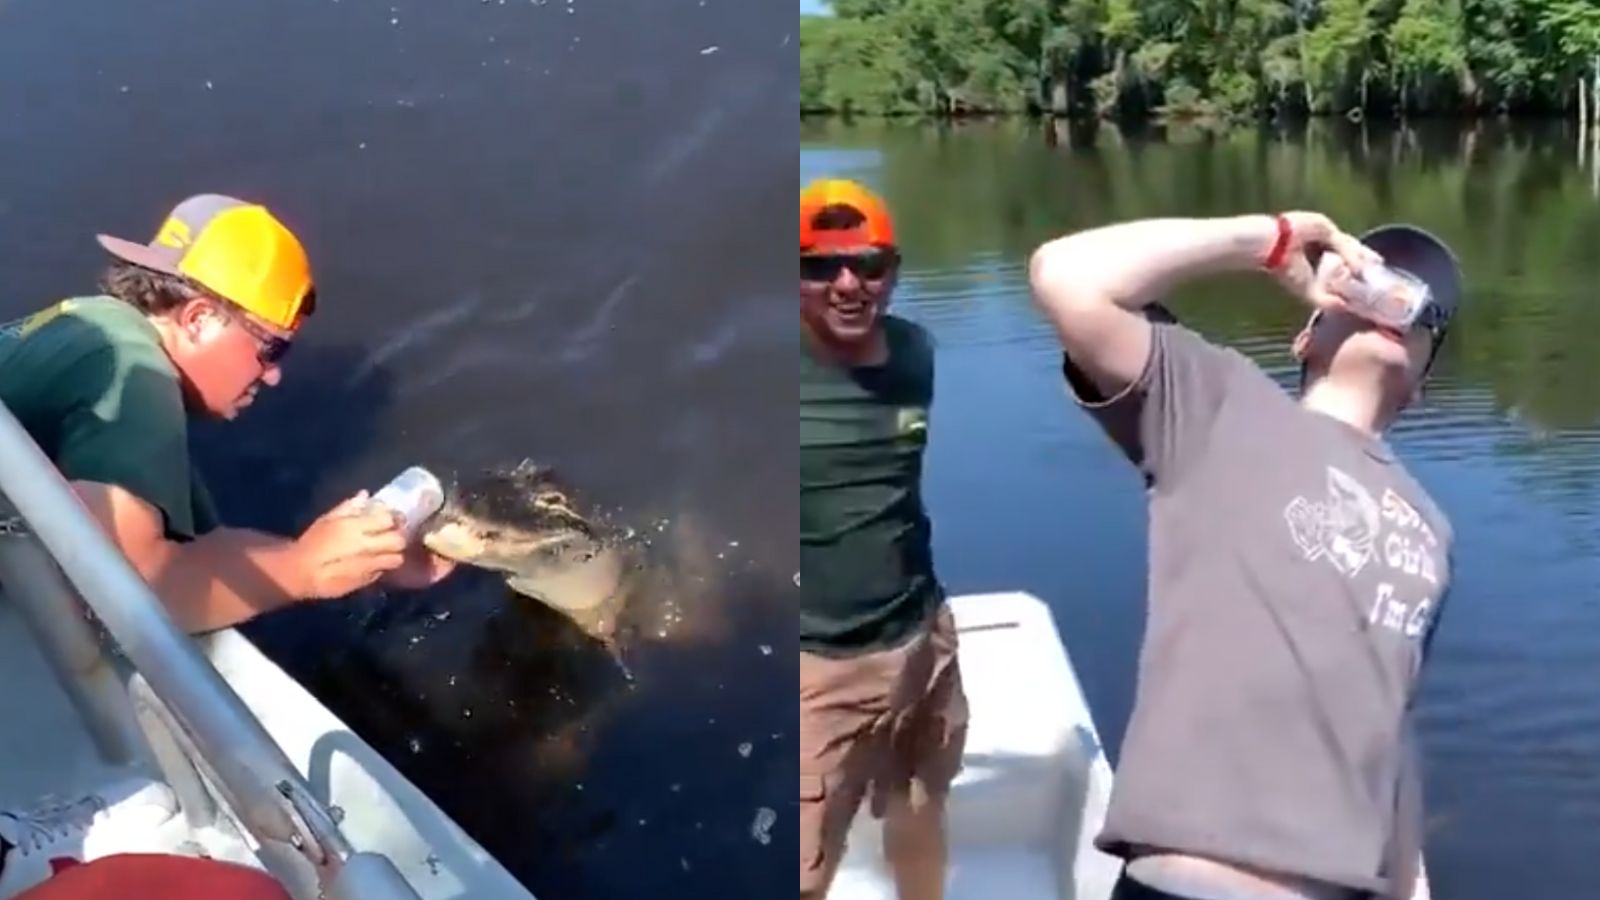 Florida man goes viral using an alligator to open a beer can